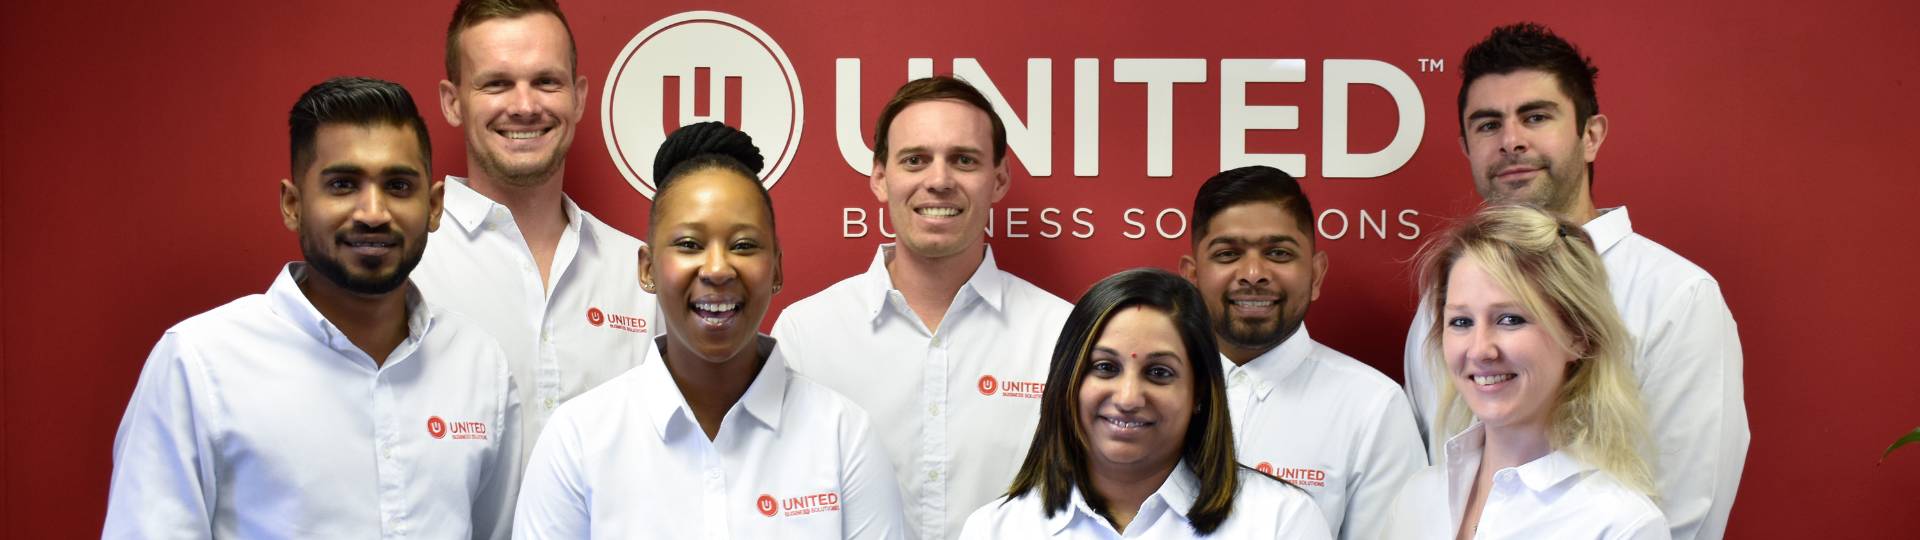 united telecoms team photograph of 8 employees at premises